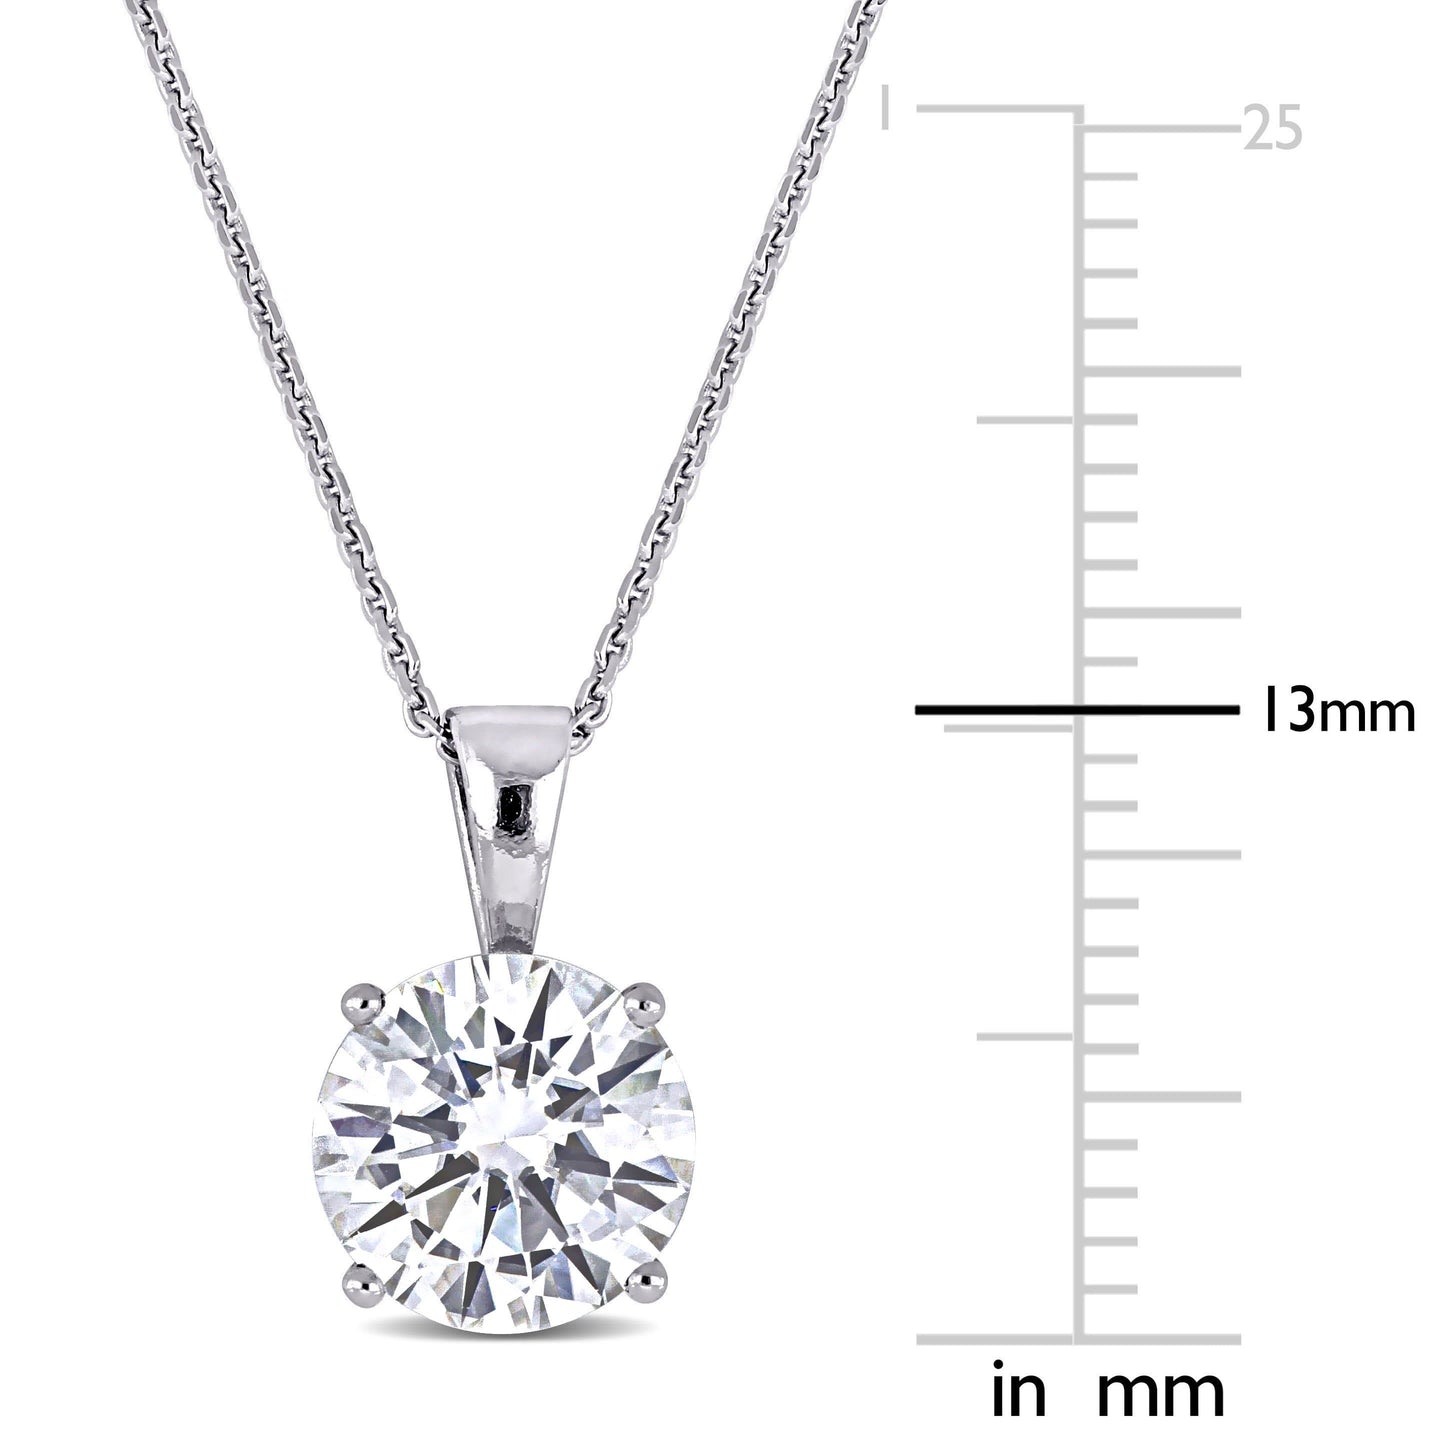 2ct Moissanite Solitaire Necklace in 14 White Gold